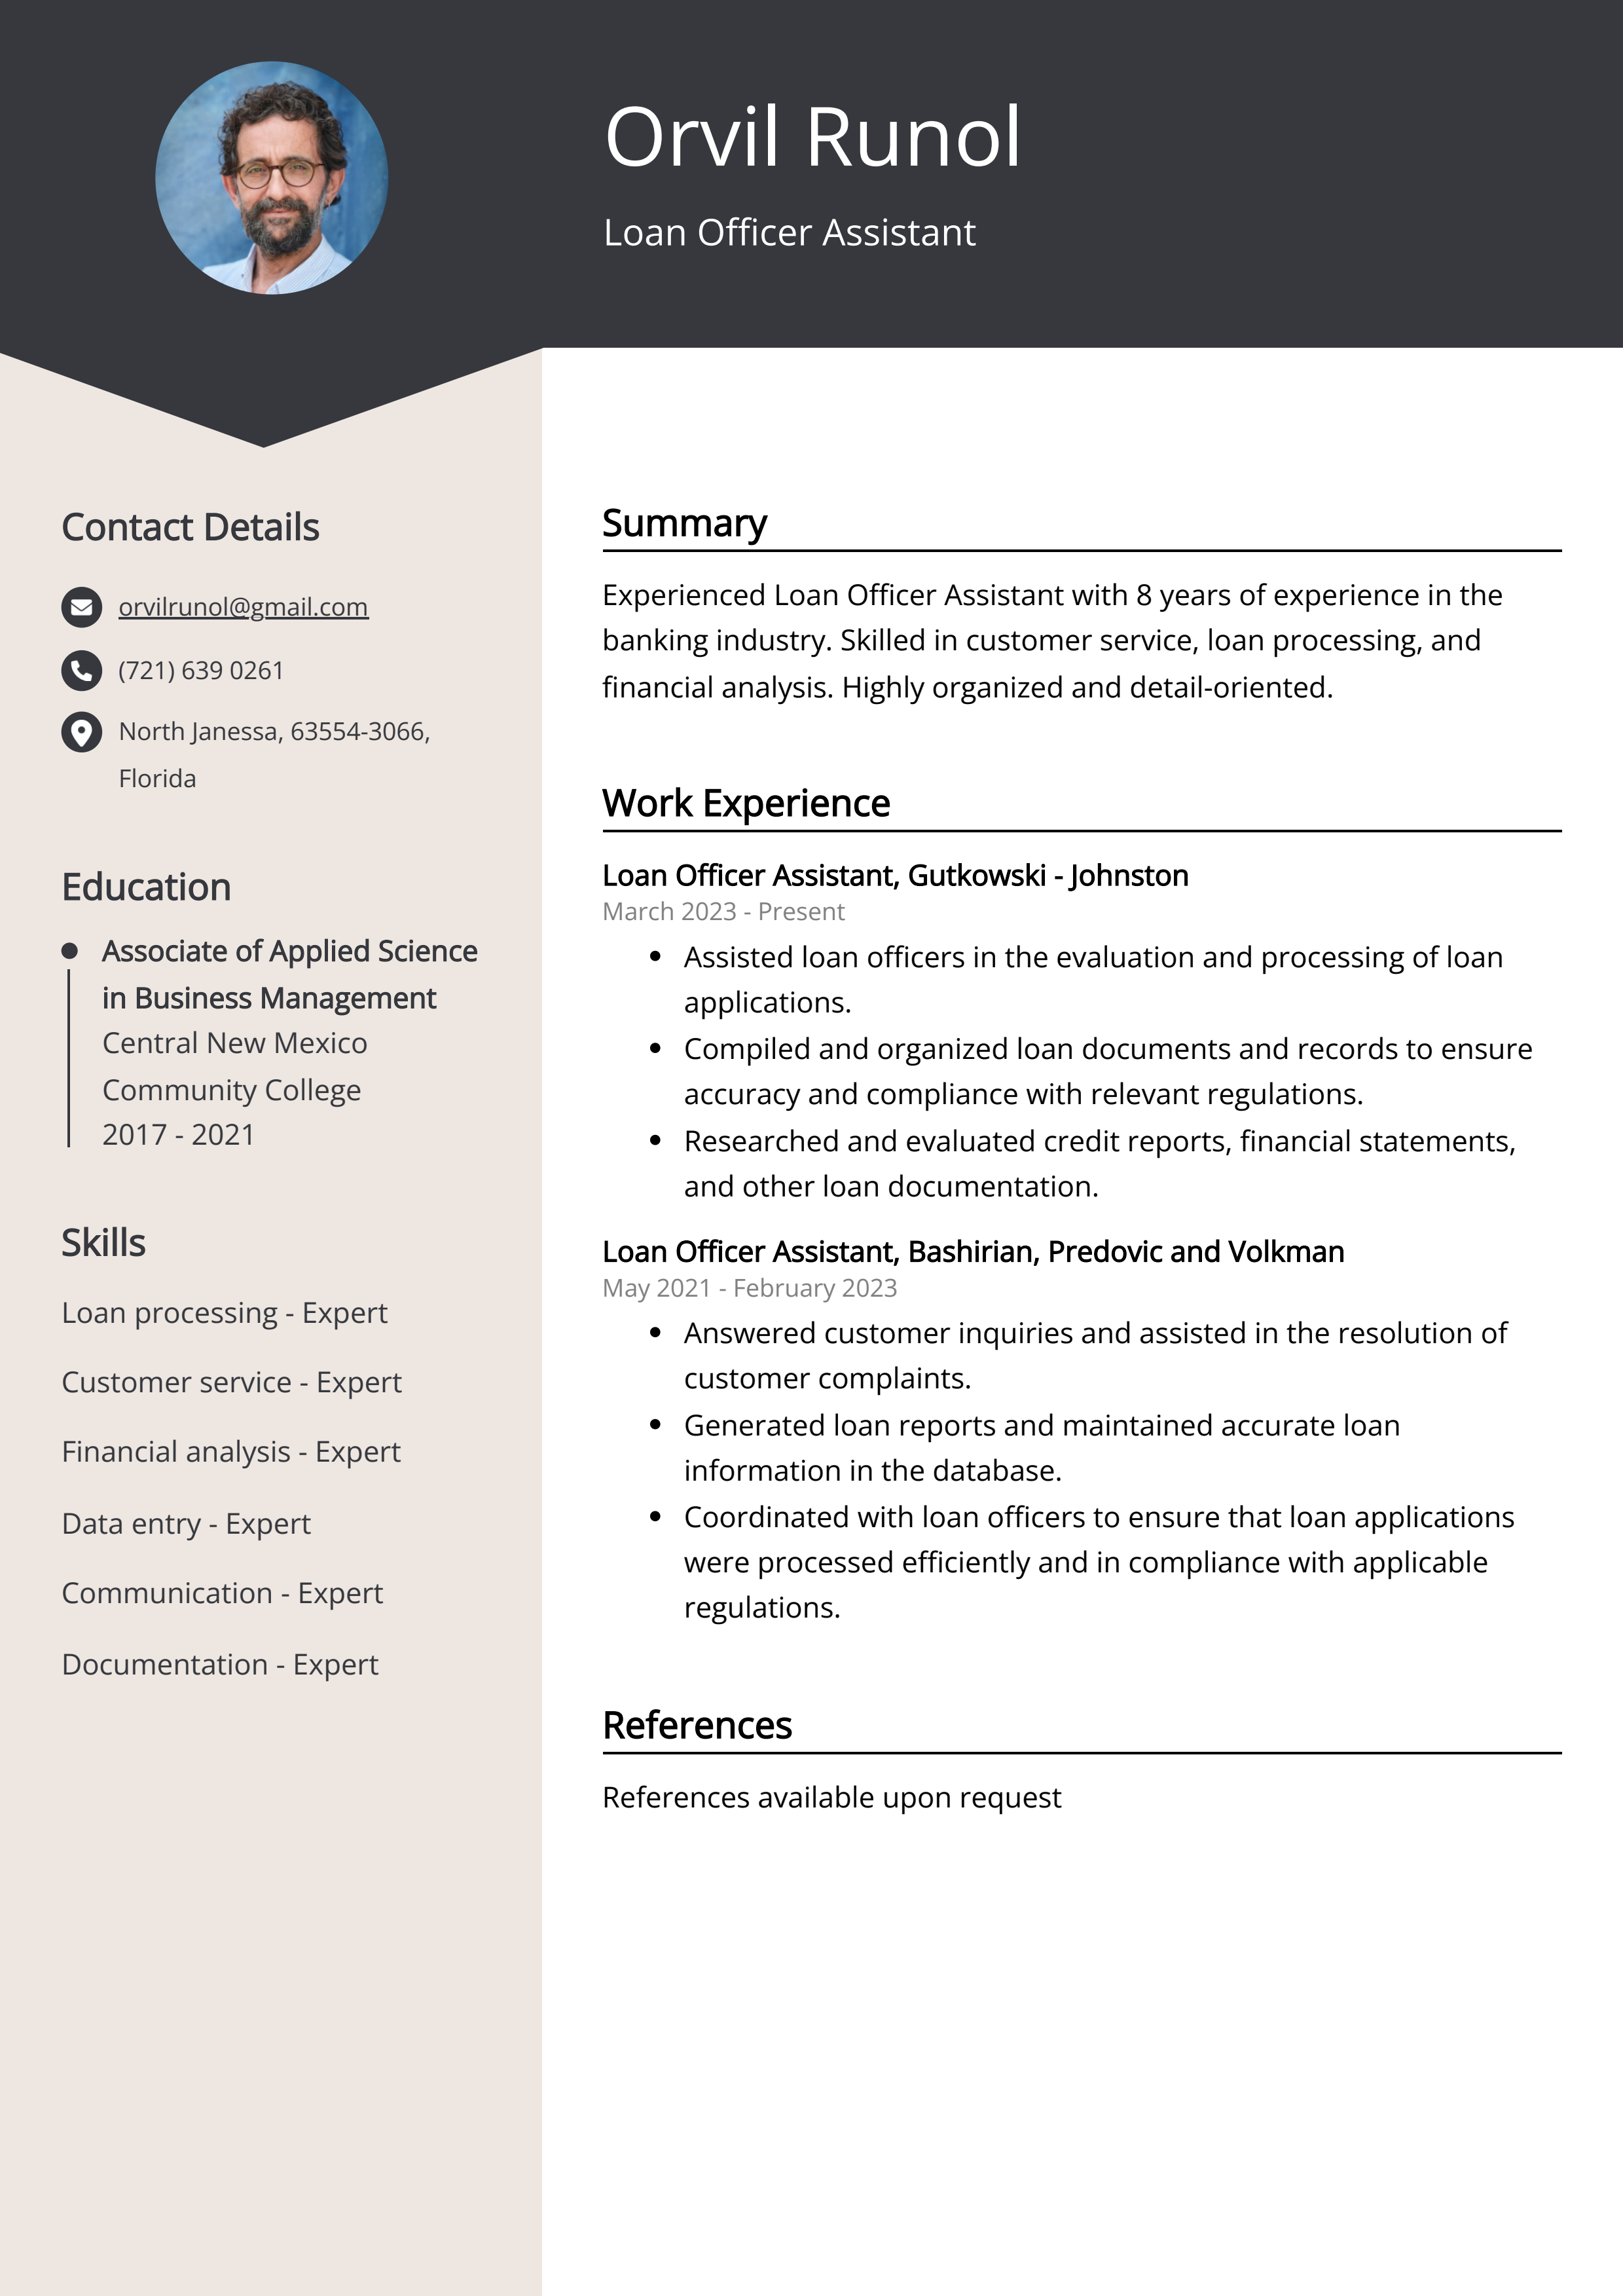 Loan Officer Assistant CV Example